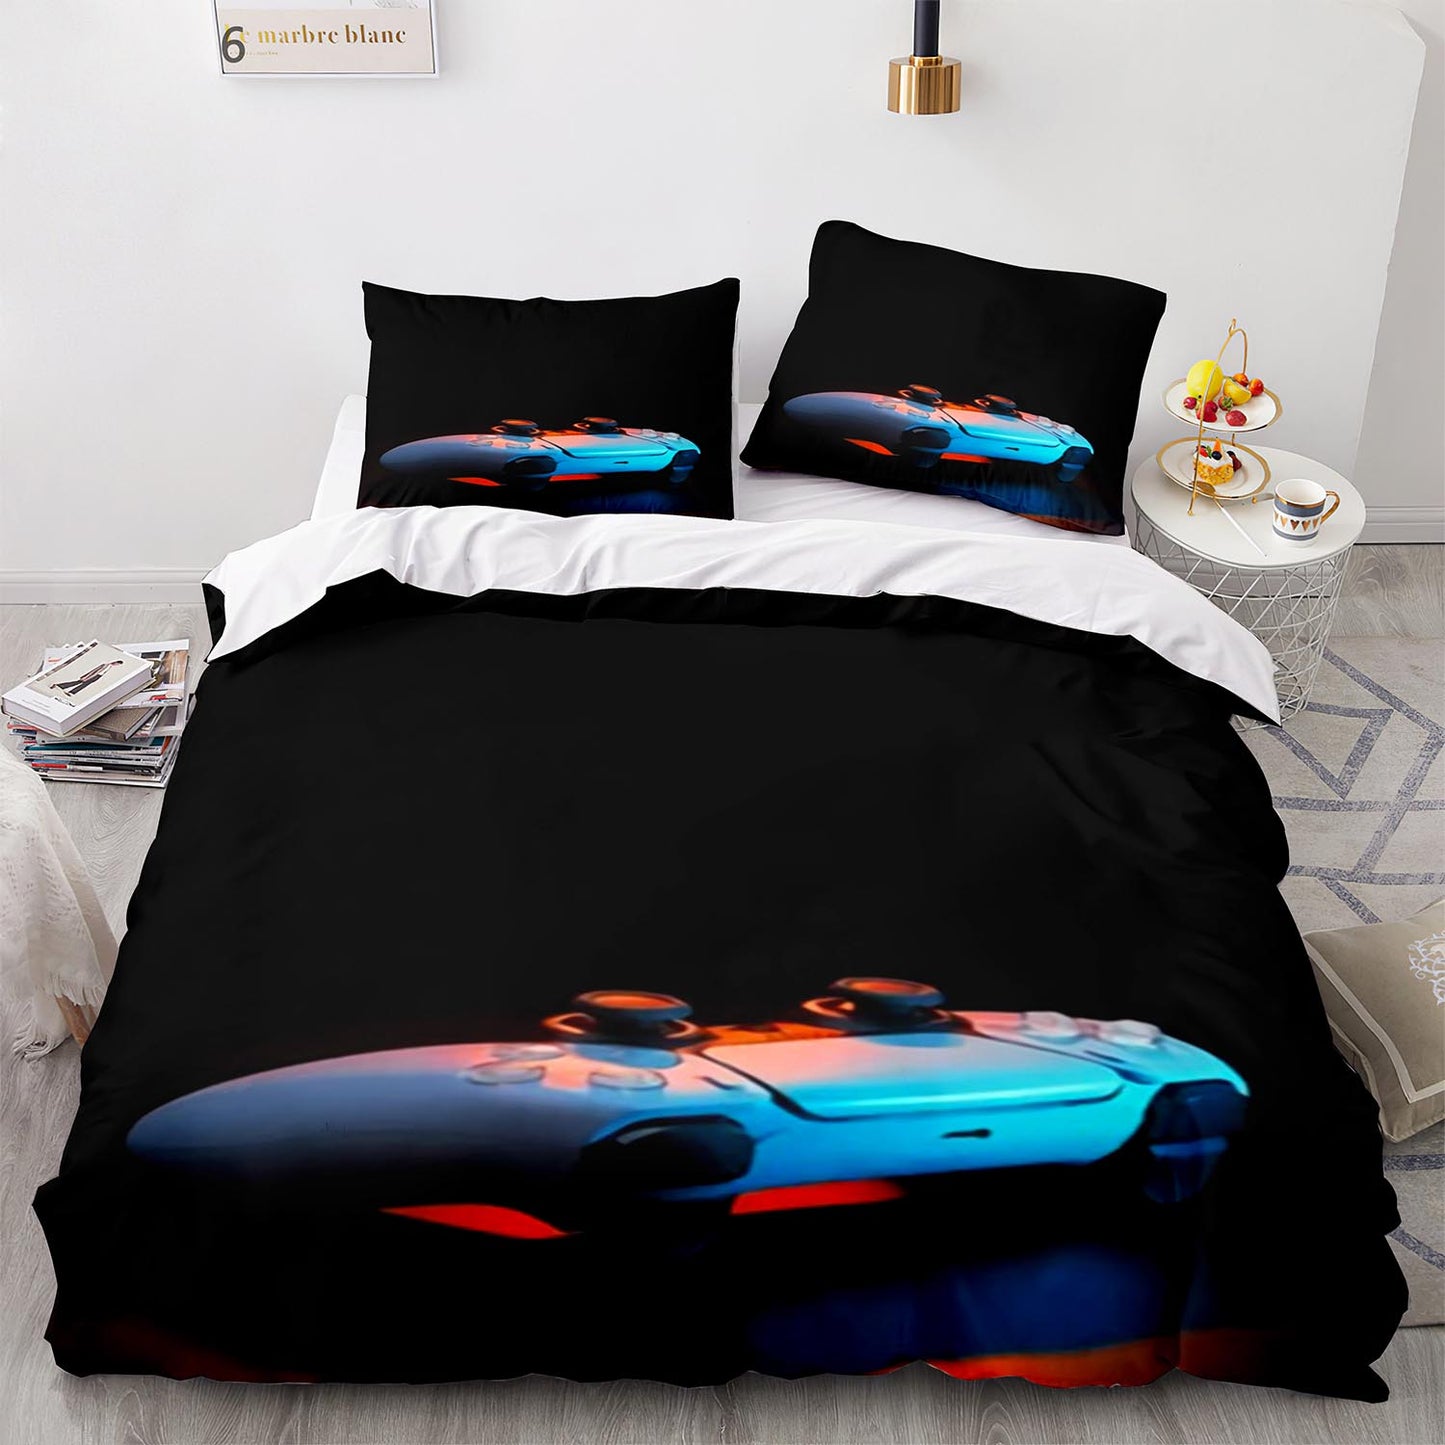 Customize Photo Logo Duvet Cover Boys Girls Adults Gift Custom Made DIY Bedding Set Designer Bed Set Queen Size Quilt Cover  PS1006